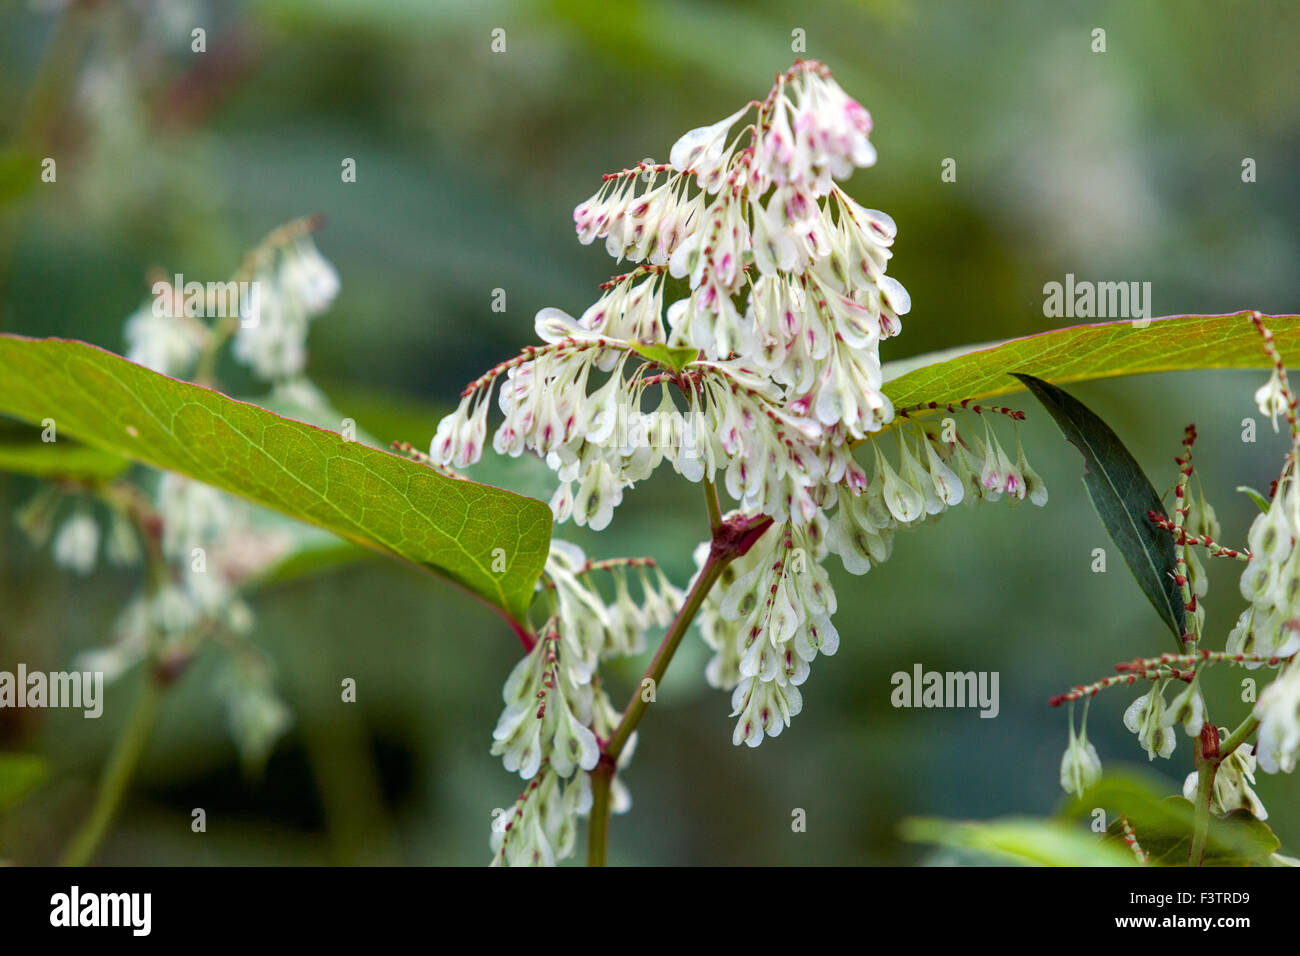 Japanese Knotweed Fallopia japonica, Reynoutria japonica, blooming plant Stock Photo